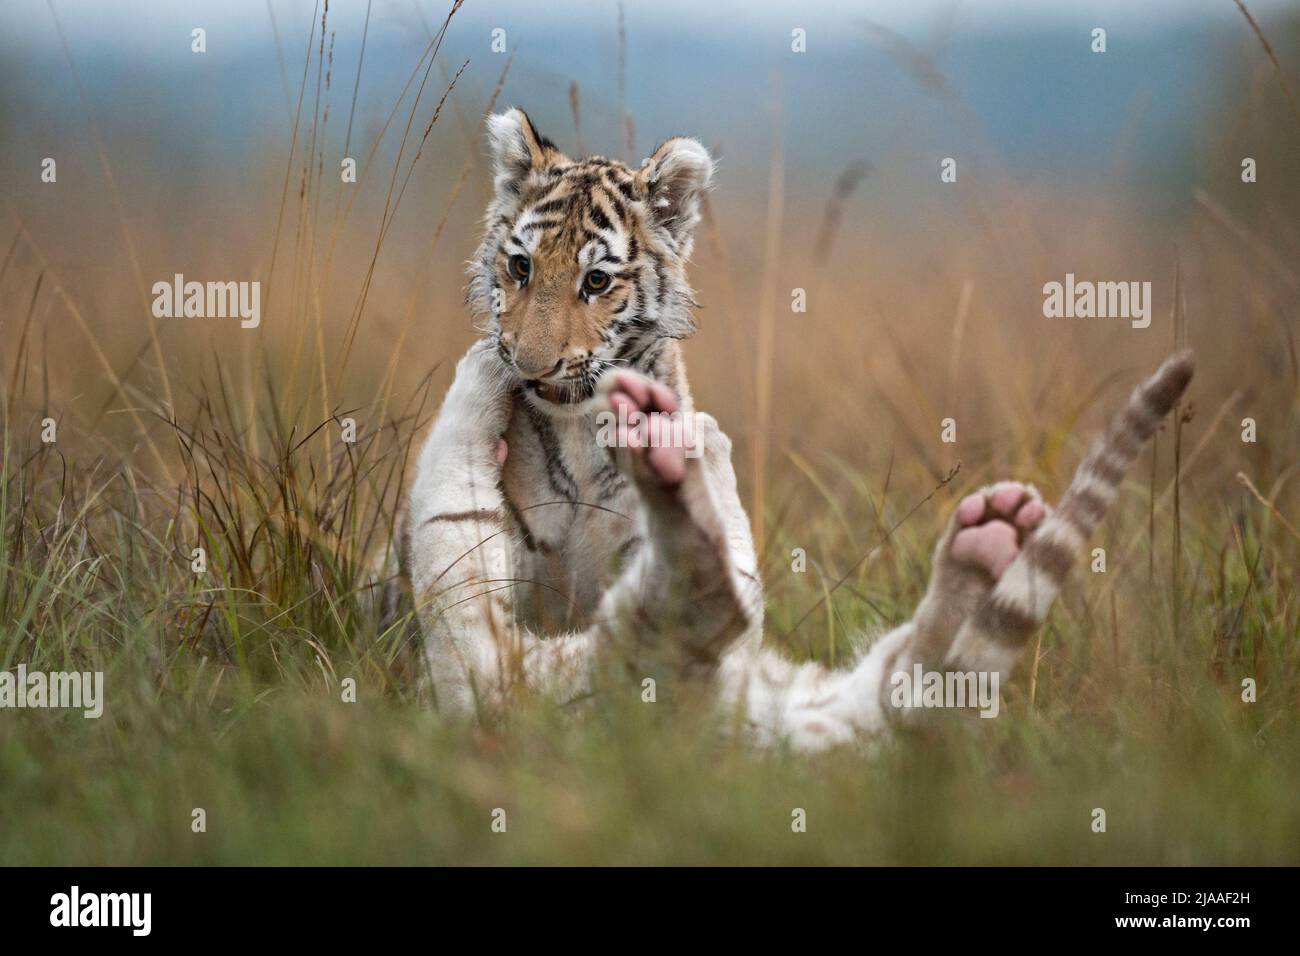 Royal Bengal Tigers / Koenigstiger ( Panthera tigris ), young siblings, playing, wrestling, romging in high grass, typical natural surrounding, funny Stock Photo